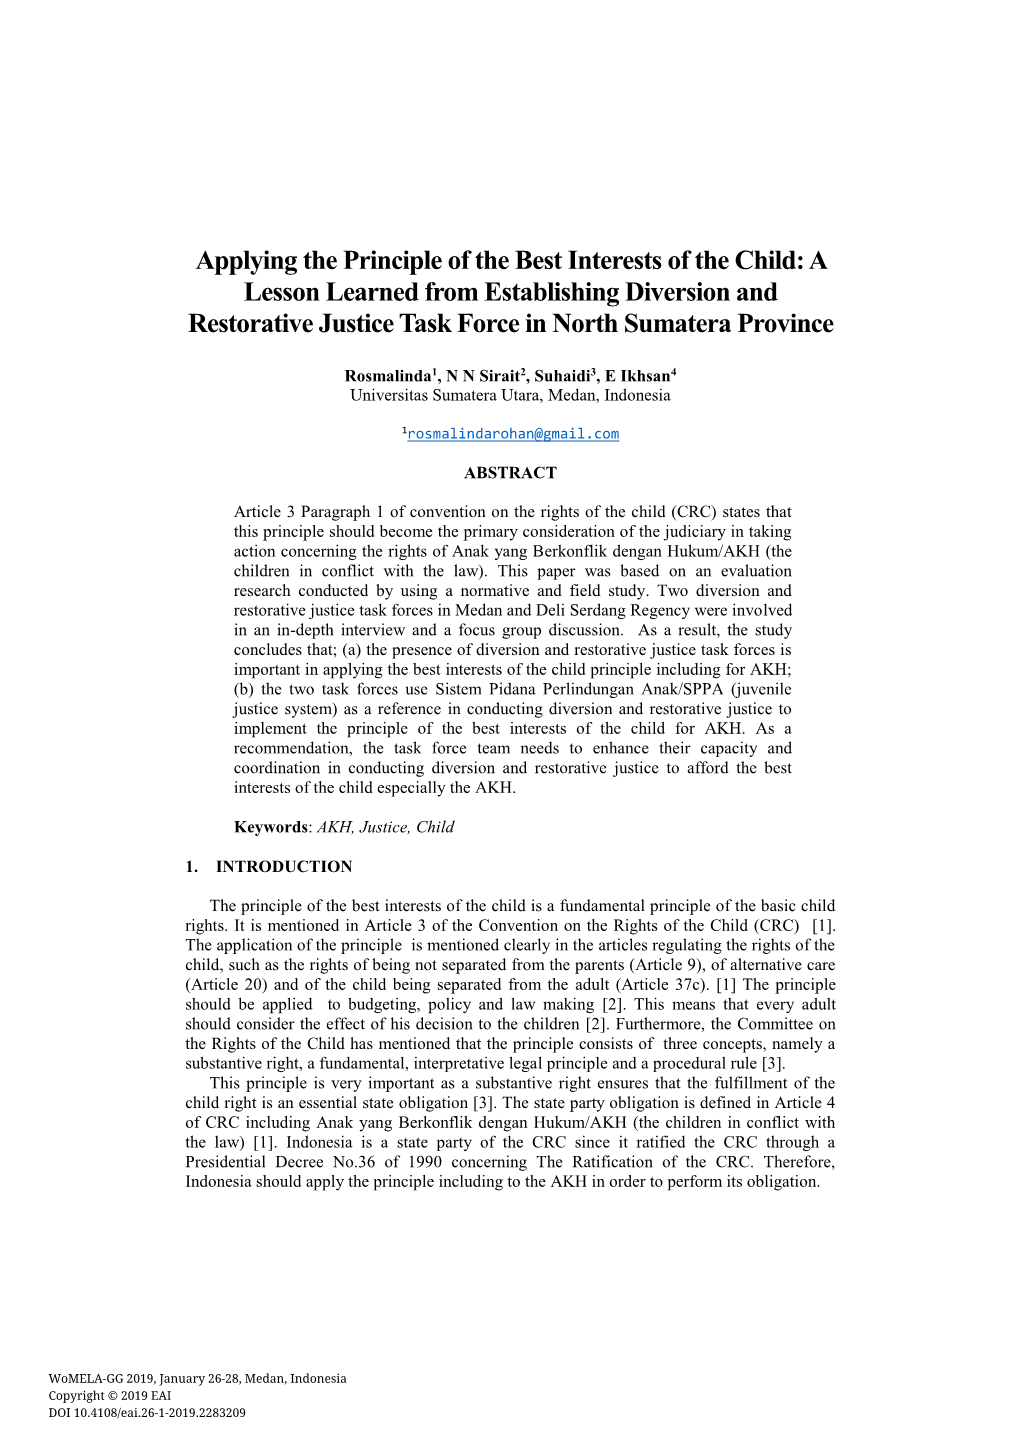 Applying the Principle of the Best Interests of the Child: a Lesson Learned from Establishing Diversion and Restorative Justice Task Force in North Sumatera Province